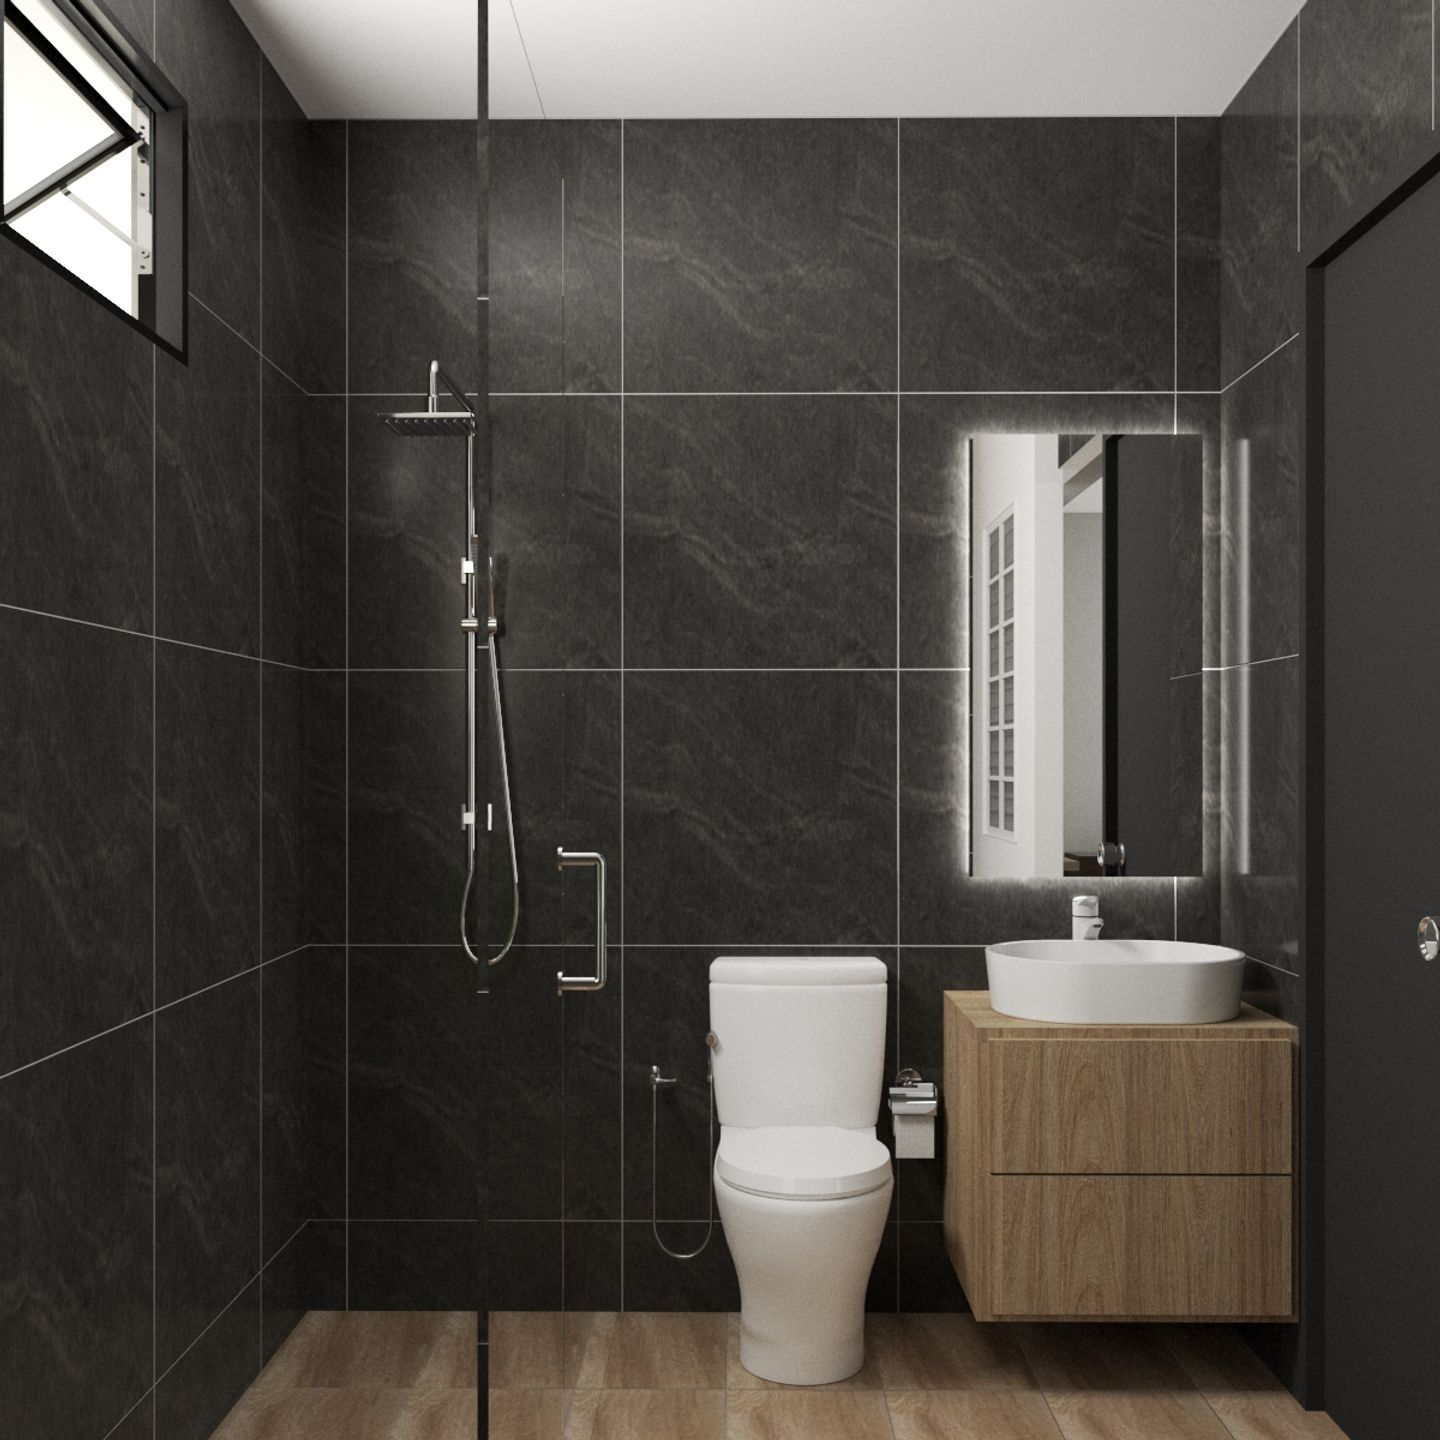 Bathroom With Black And Wood Interiors - Livspace